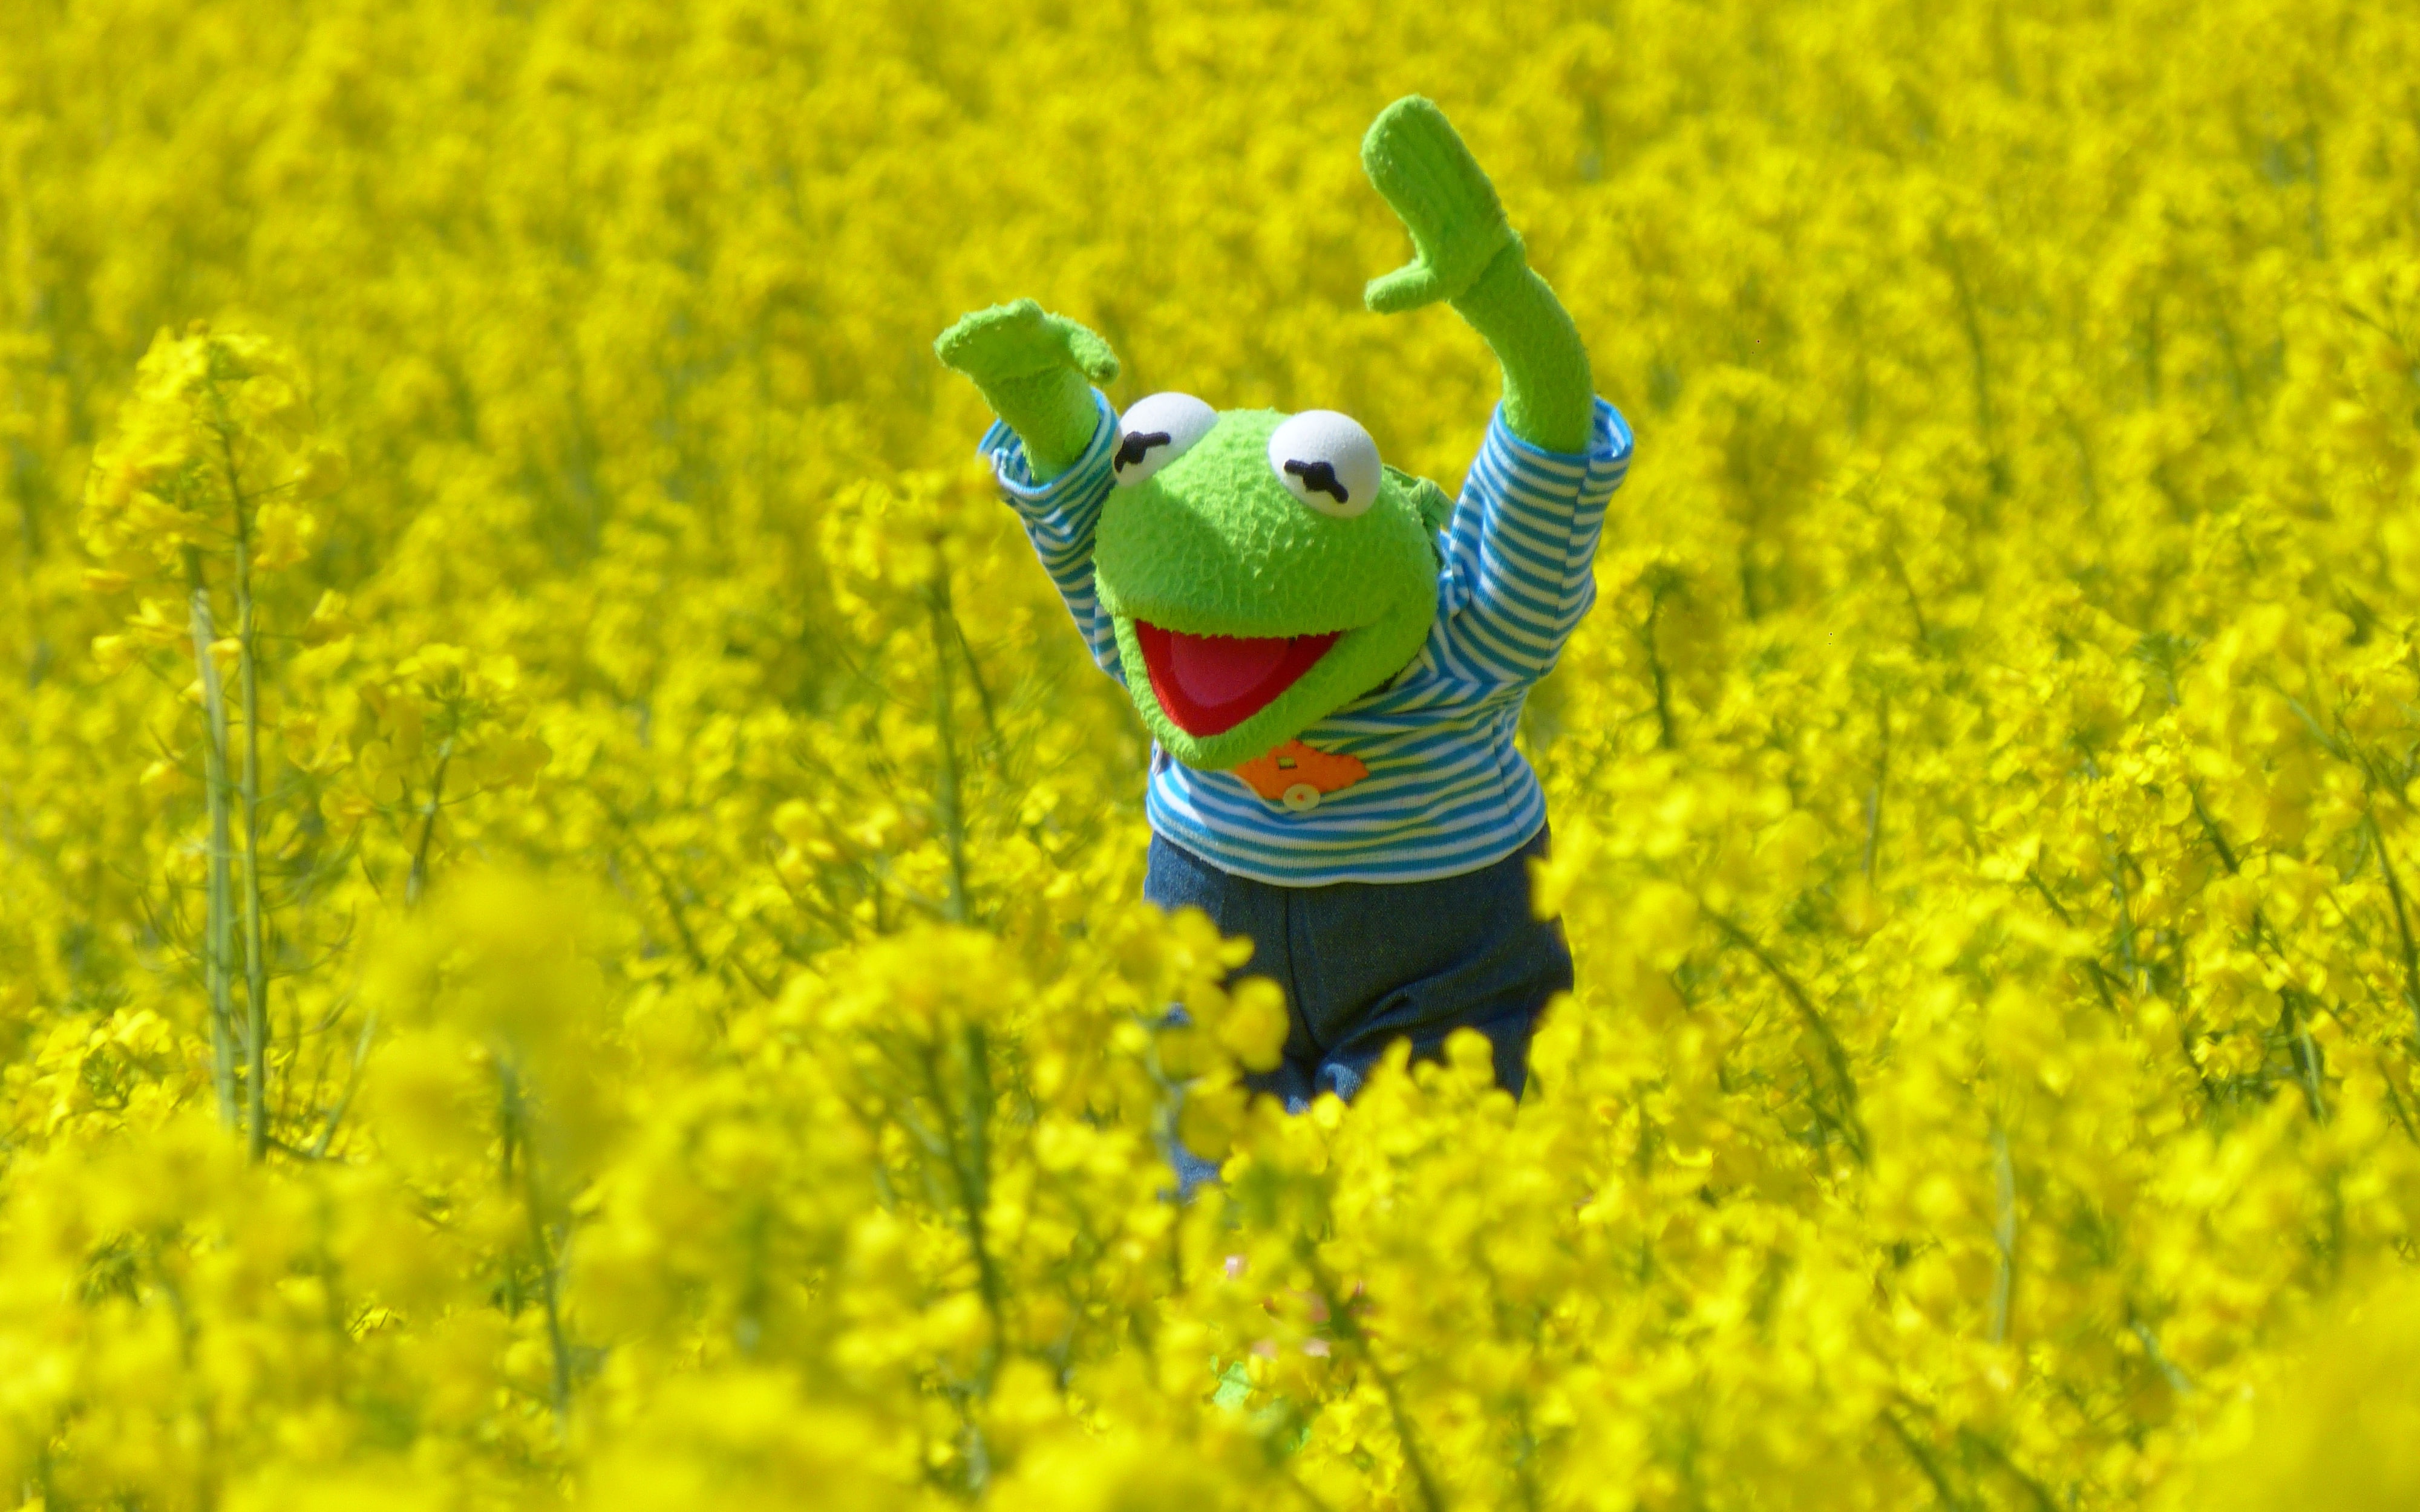 Kermit the Frog, blossoms, one person, yellow, motion, plant